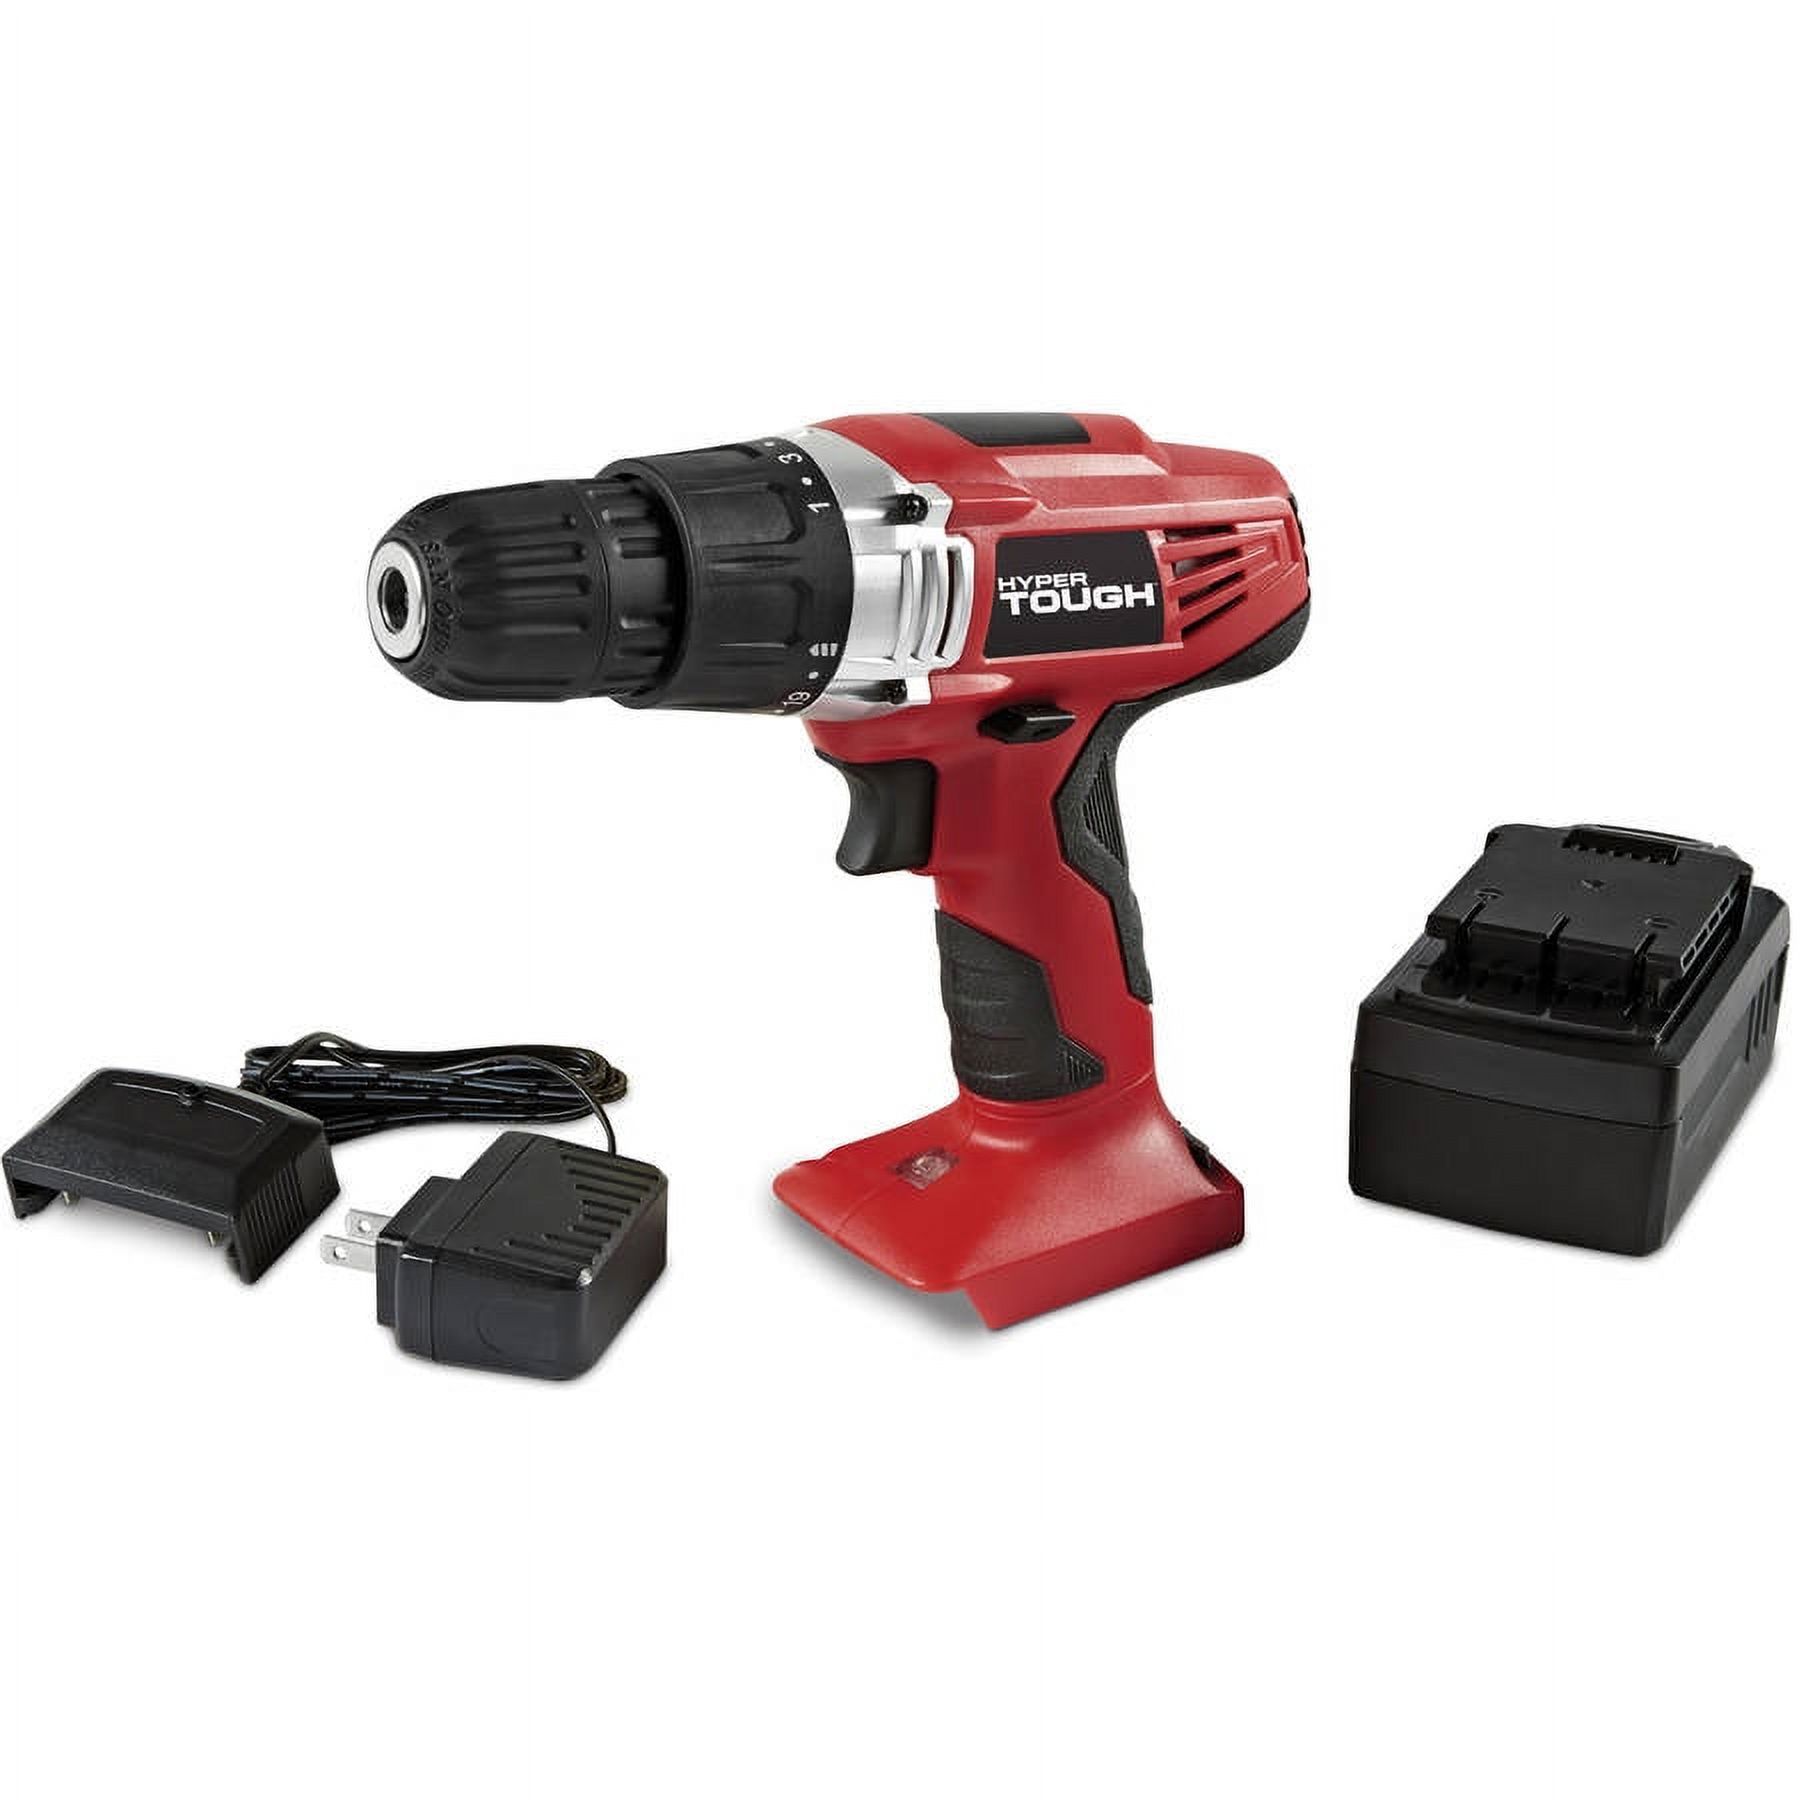 Hyper Tough 18V Cordless Drill, 3/8 inch Chuck, Variable Speed, with 1.2Ah Nickel Cadmium Battery, Charger, Bit Holder & LED Light - image 2 of 8